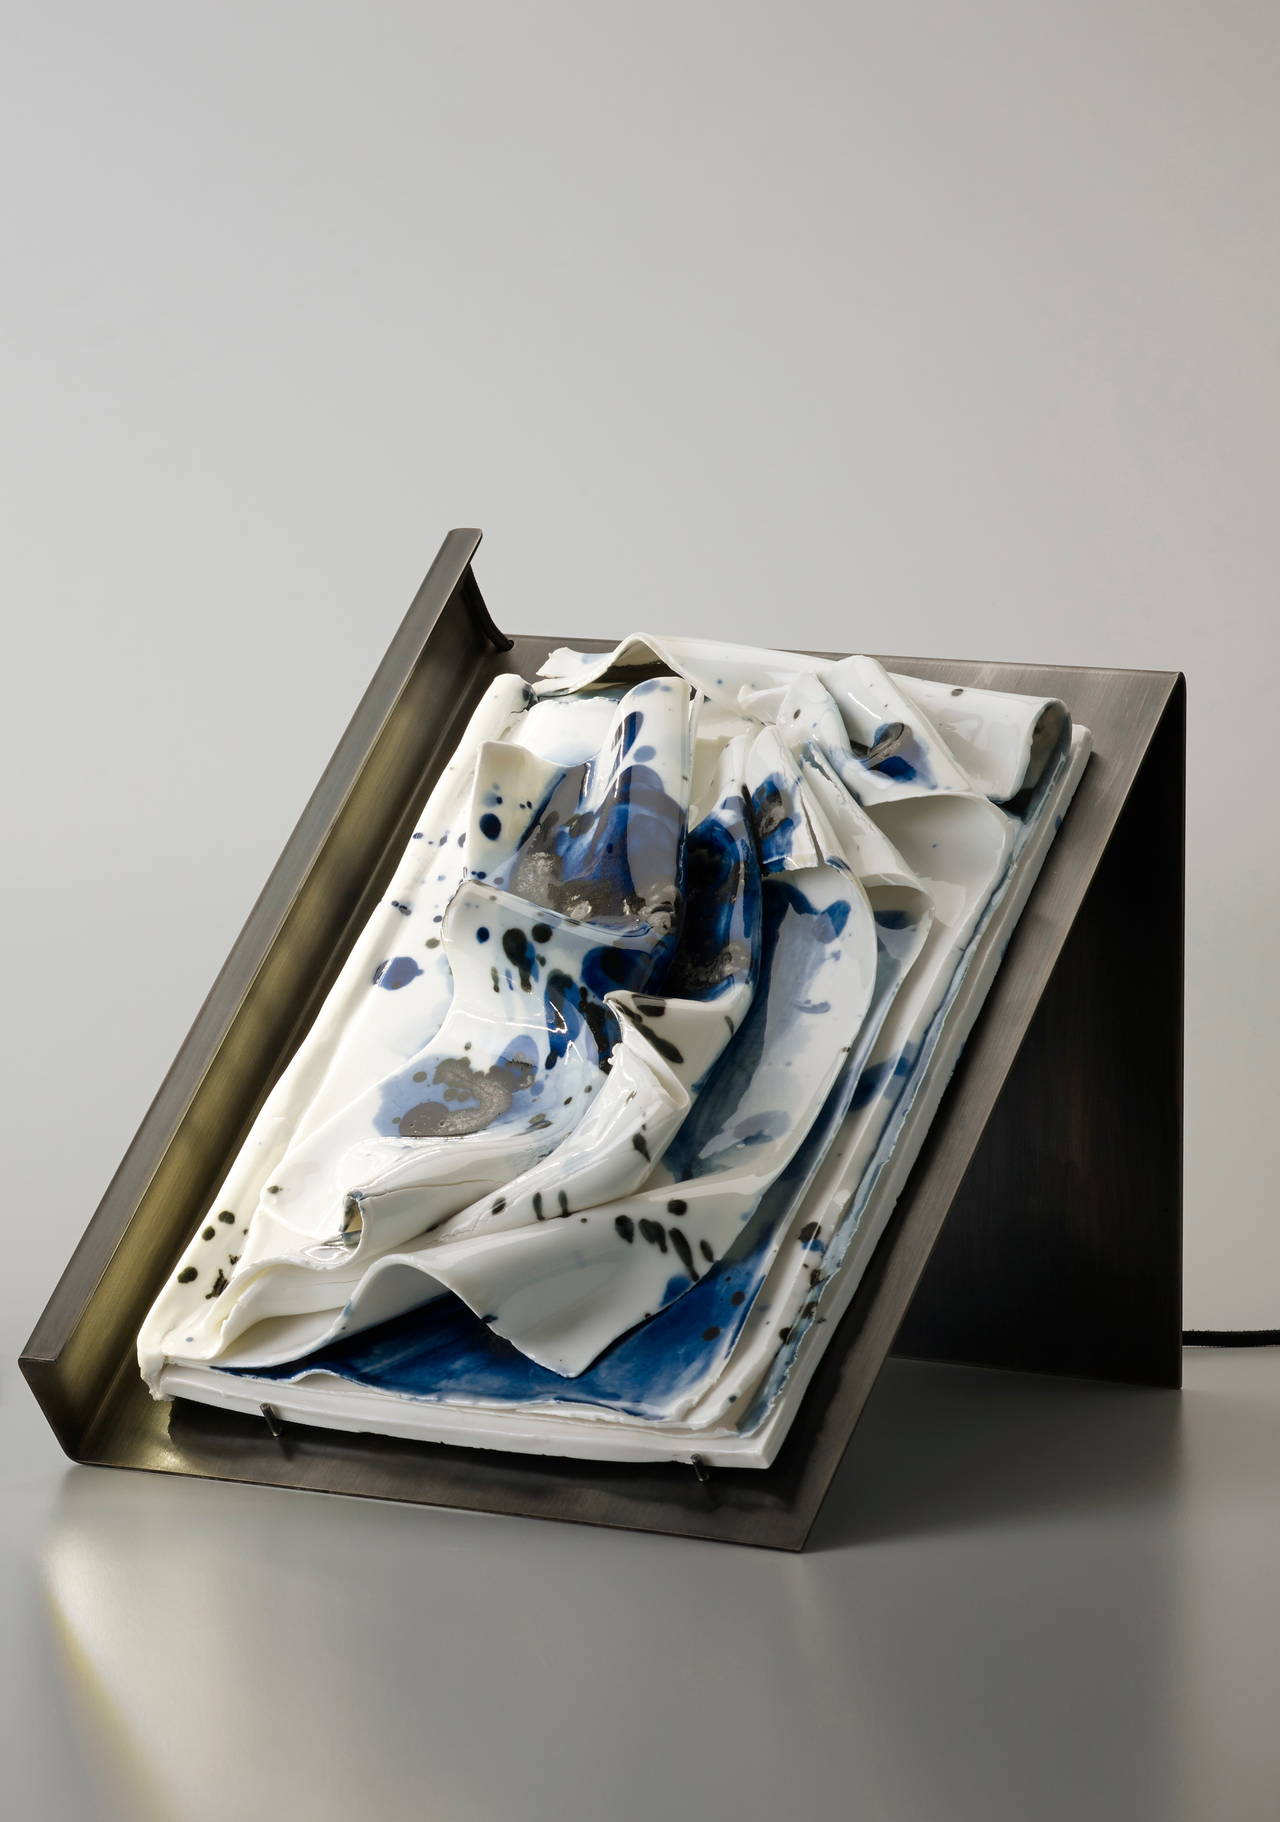 'Storm' is a unique handmade porcelain book and table light sculpture. It is part of the ‘Insomnio’ collection, a set of 21 striking porcelain books handmade by French visual artist Charlotte Cornaton, 28 years old, in the famous historic workshops